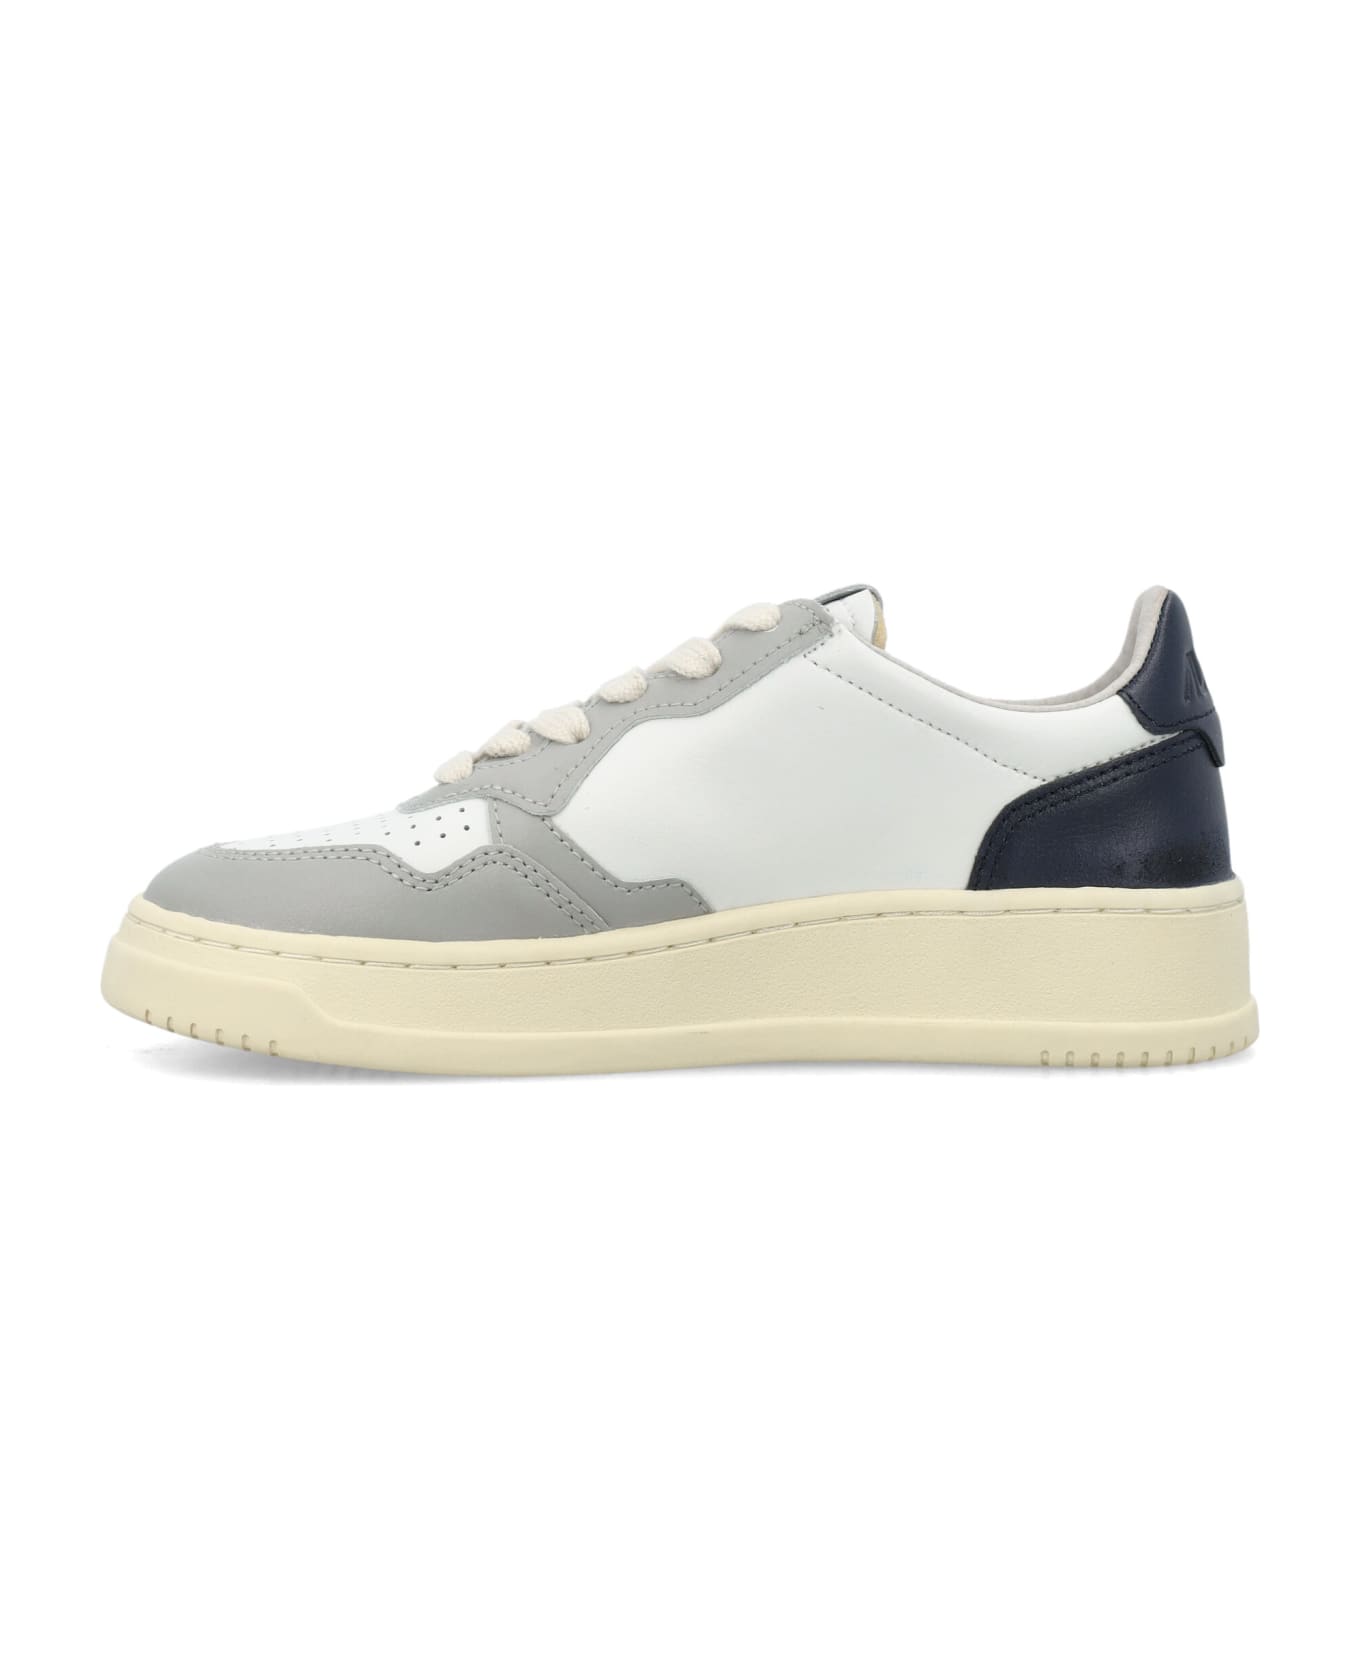 Autry Medalist Low Sneakers - WHITE GREY BLUE